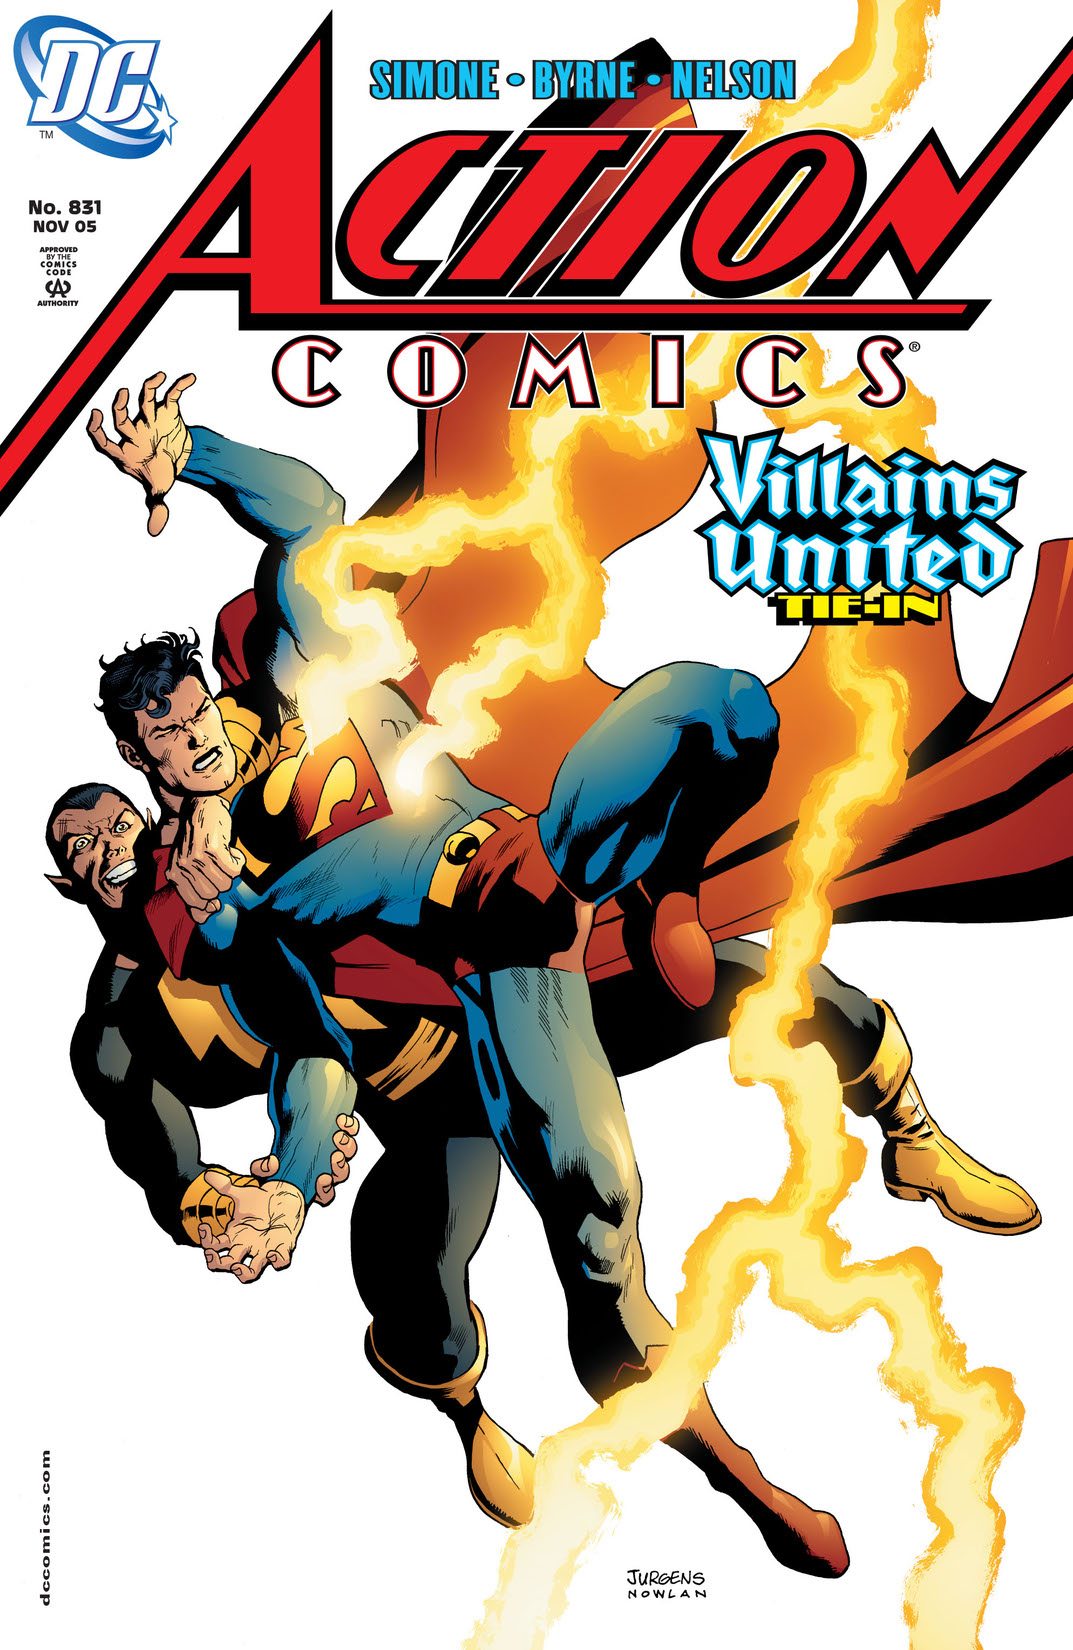 Superman and Black Adam battling with lightning striking Superman on the front cover of 'Action Comics #831'.